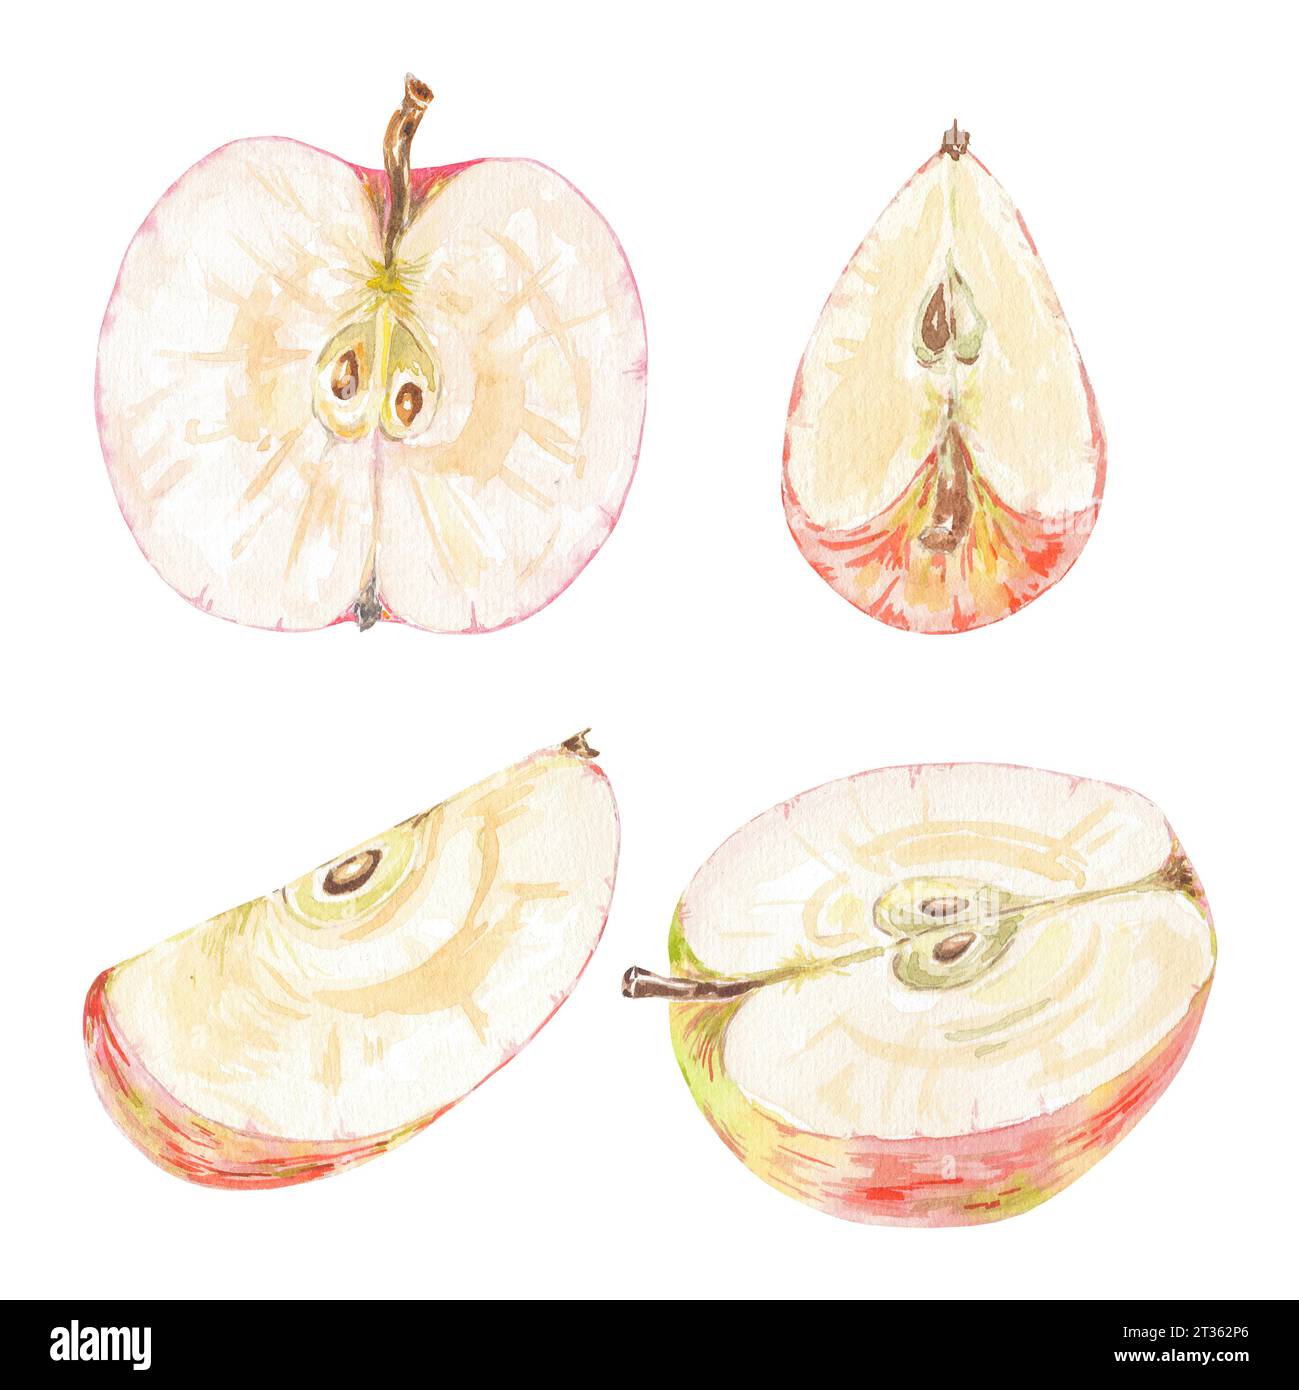 Clipart hand painted red apples, slice. Watercolor botanical illustration isolated element on white background. Art for food design, logo, pattern Stock Photo